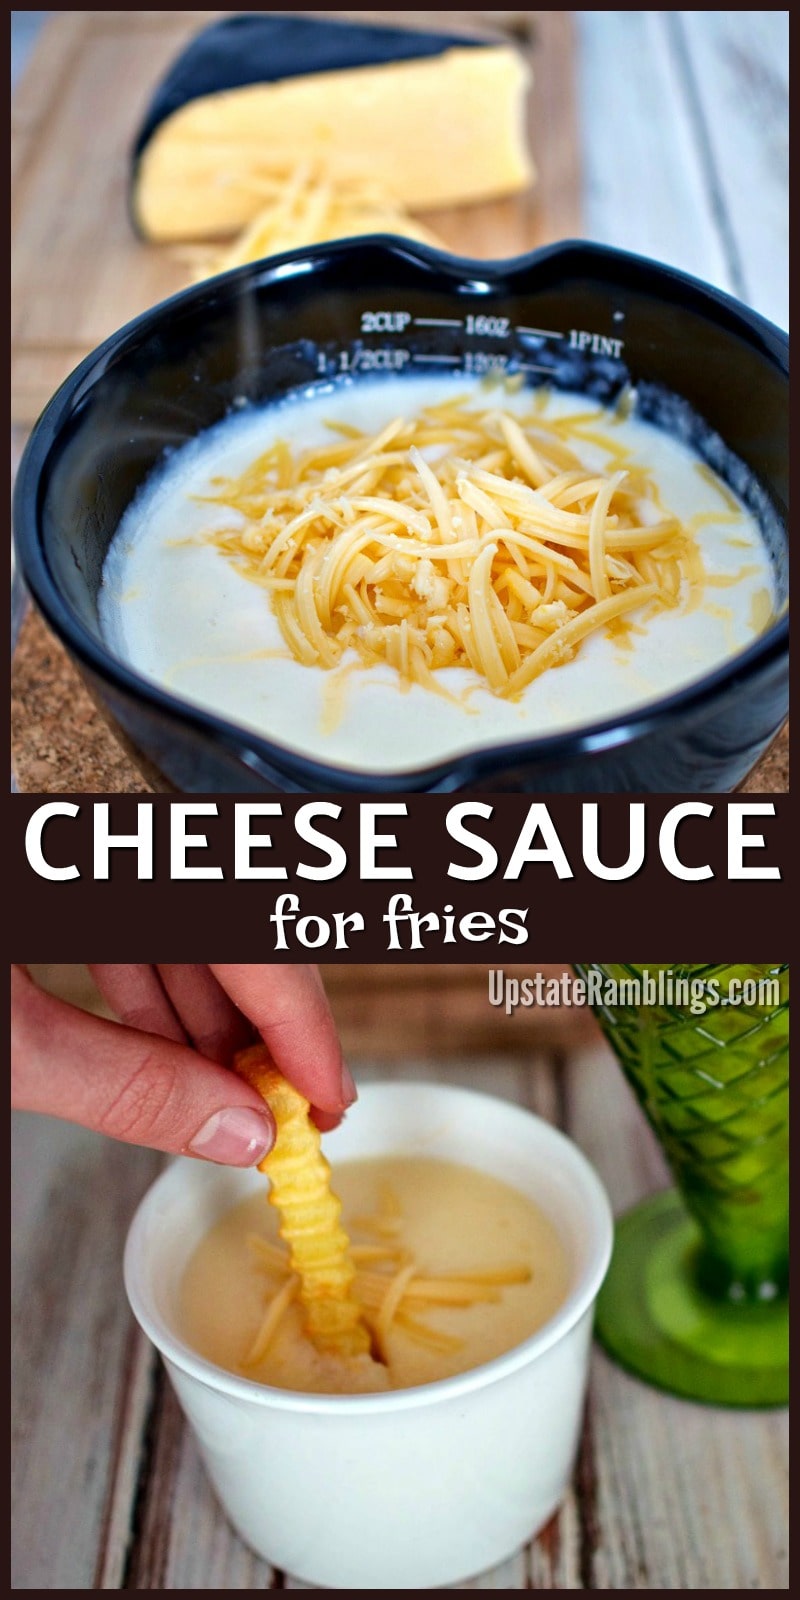 This Gouda Cheese Sauce is the perfect creamy cheese sauce for fries, pretzels, tortilla chips or pasta. The rich and creamy cheese sauce goes perfectly on cheese fries and makes both a great comfort food and a delicious cheese dip for party appetizers. #cheesesauce #dipping #gouda